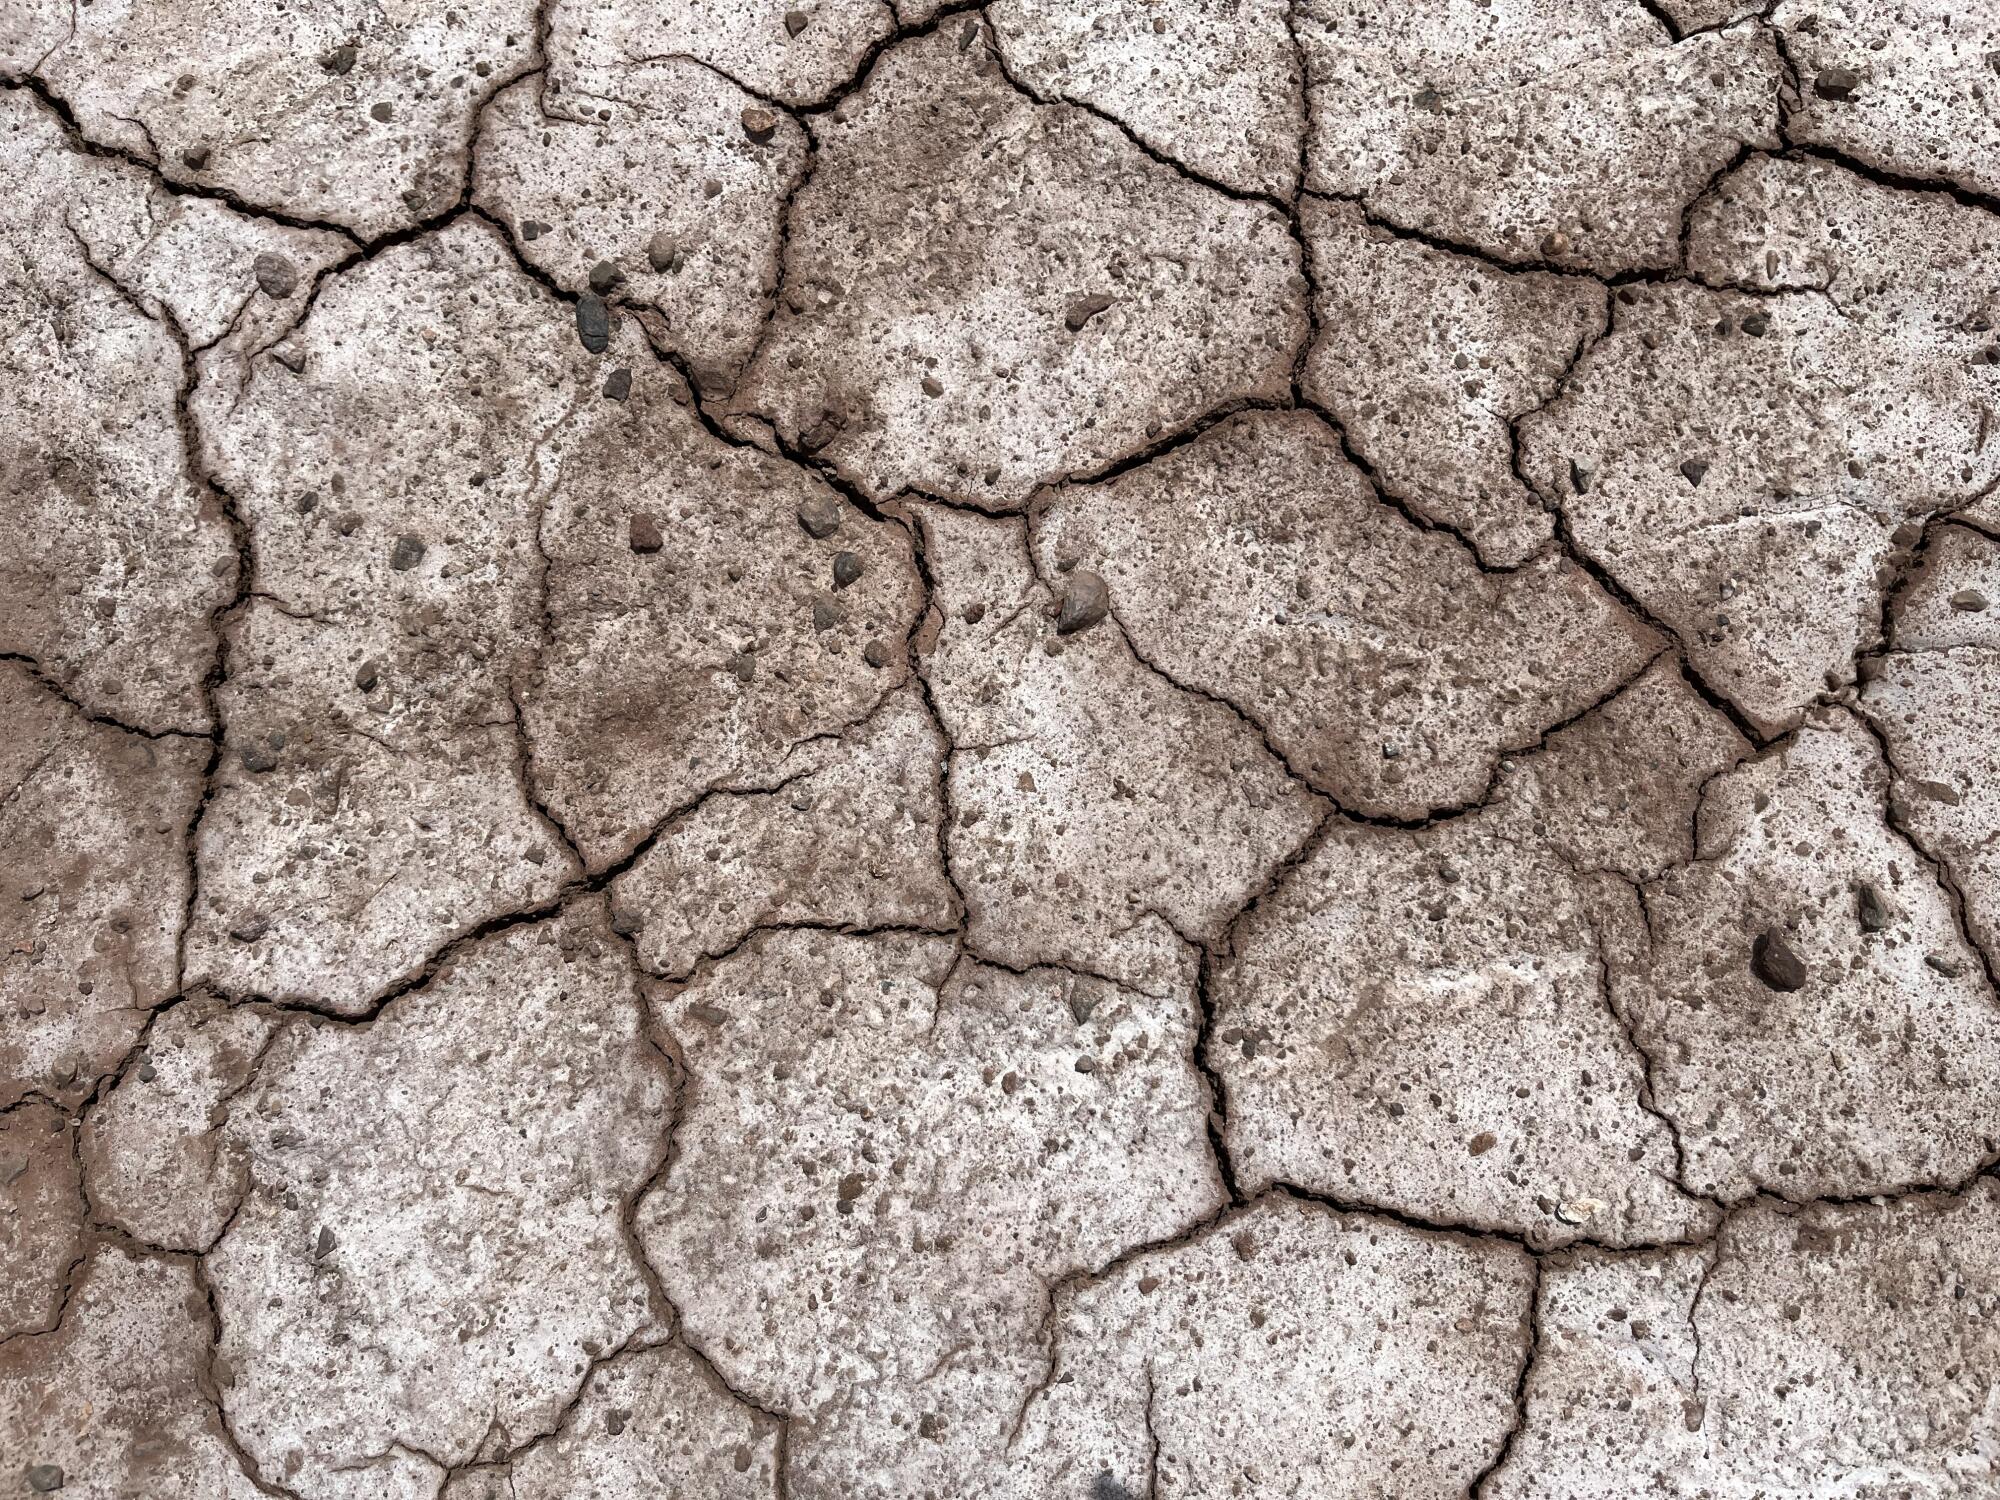 A photo of dry, cracked earth.